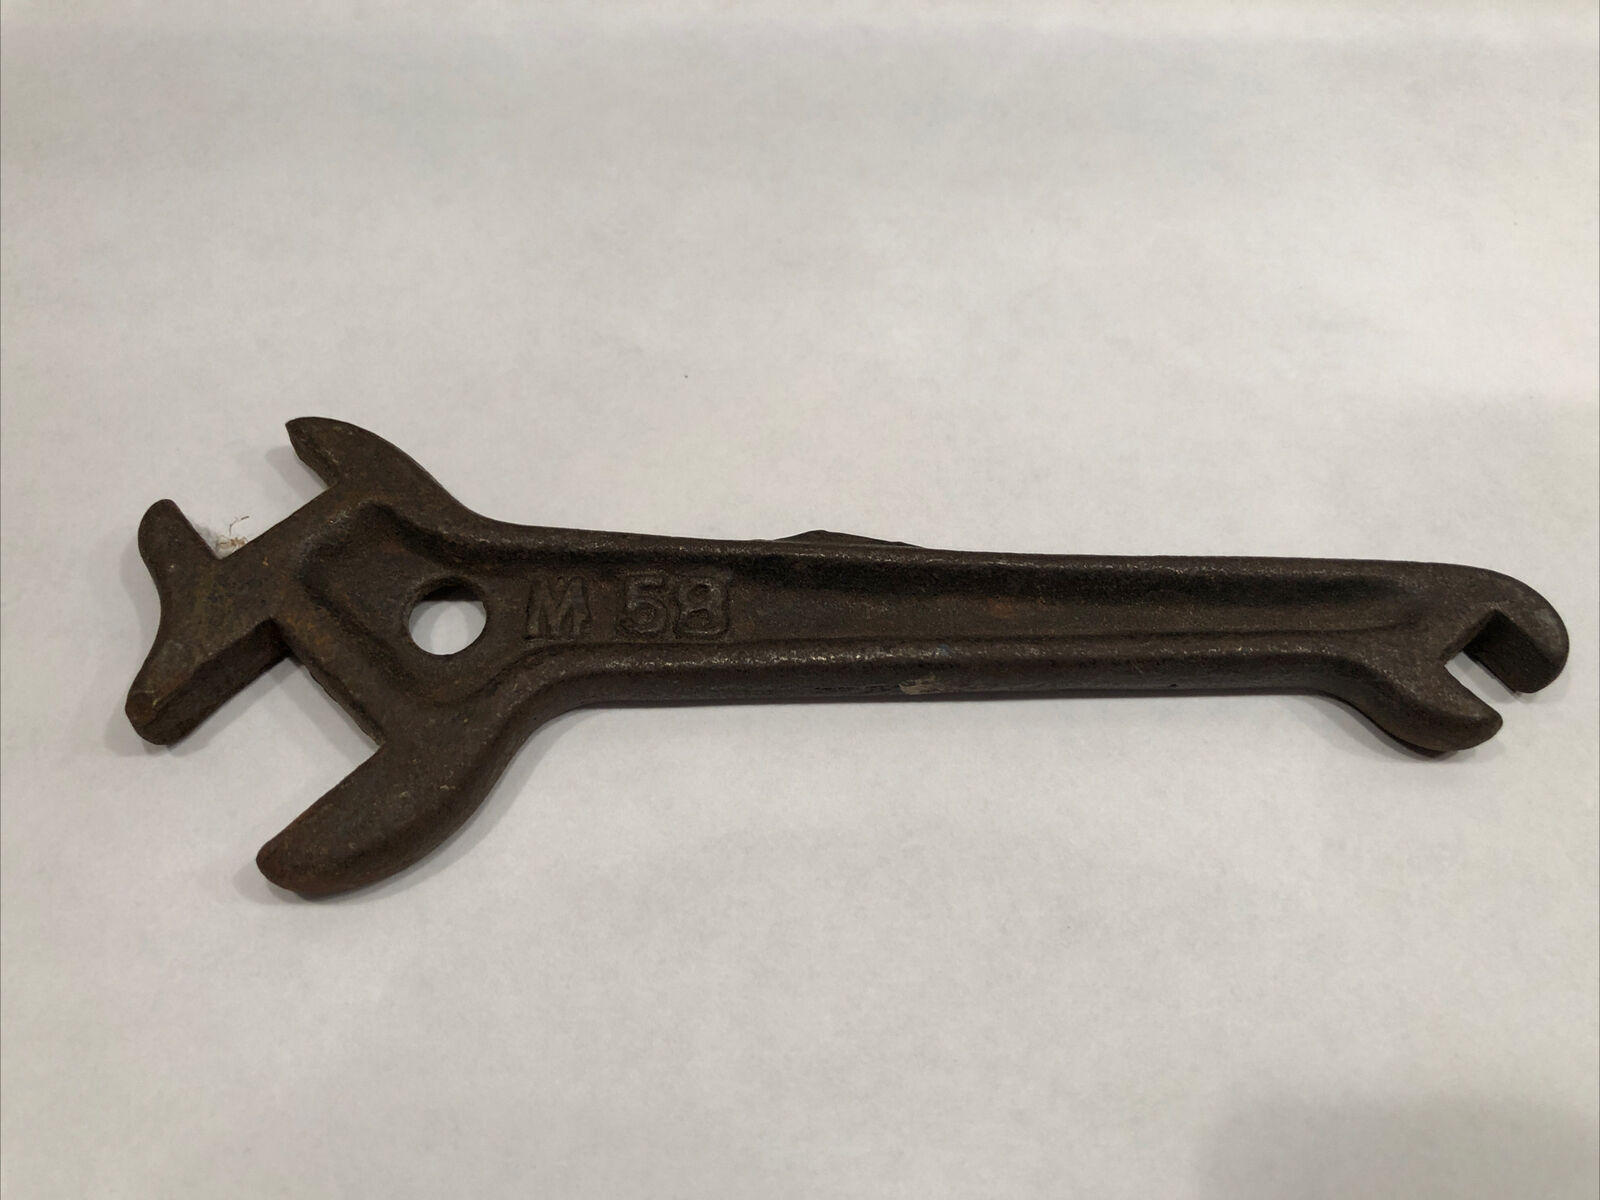 Vintage Coldwell Lawnmower M58 3 Jaw Wrench Nice Aged Patina